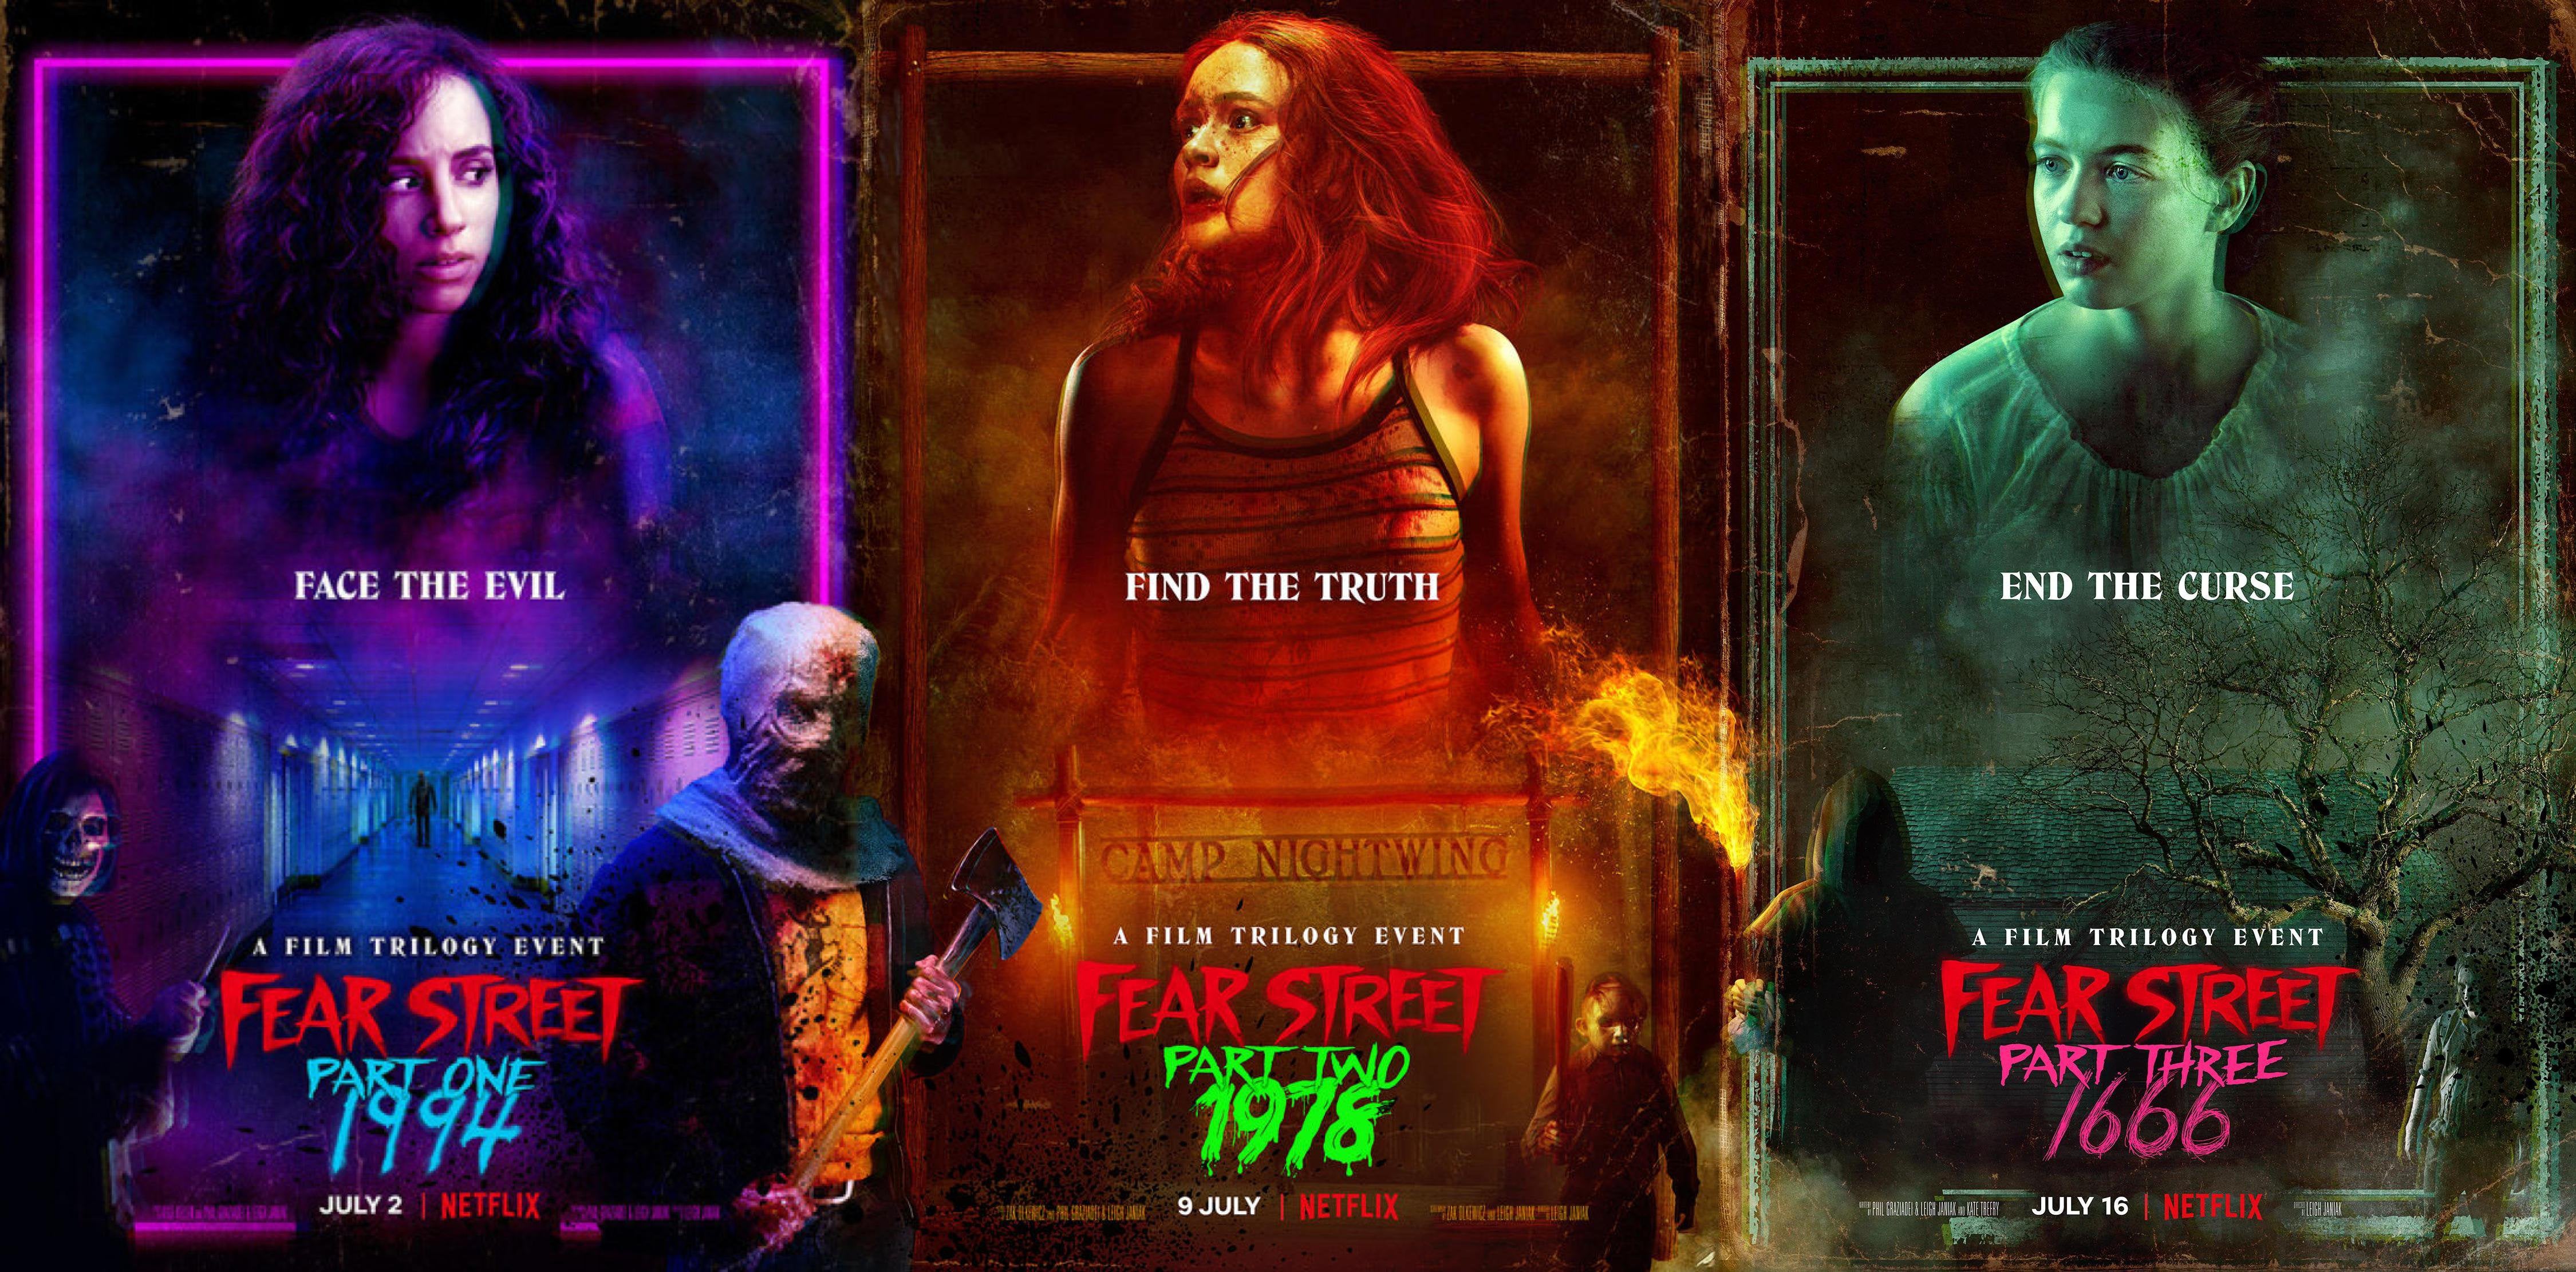 Now that all three Fear Street films have posters, here they are combined into one image!: movies